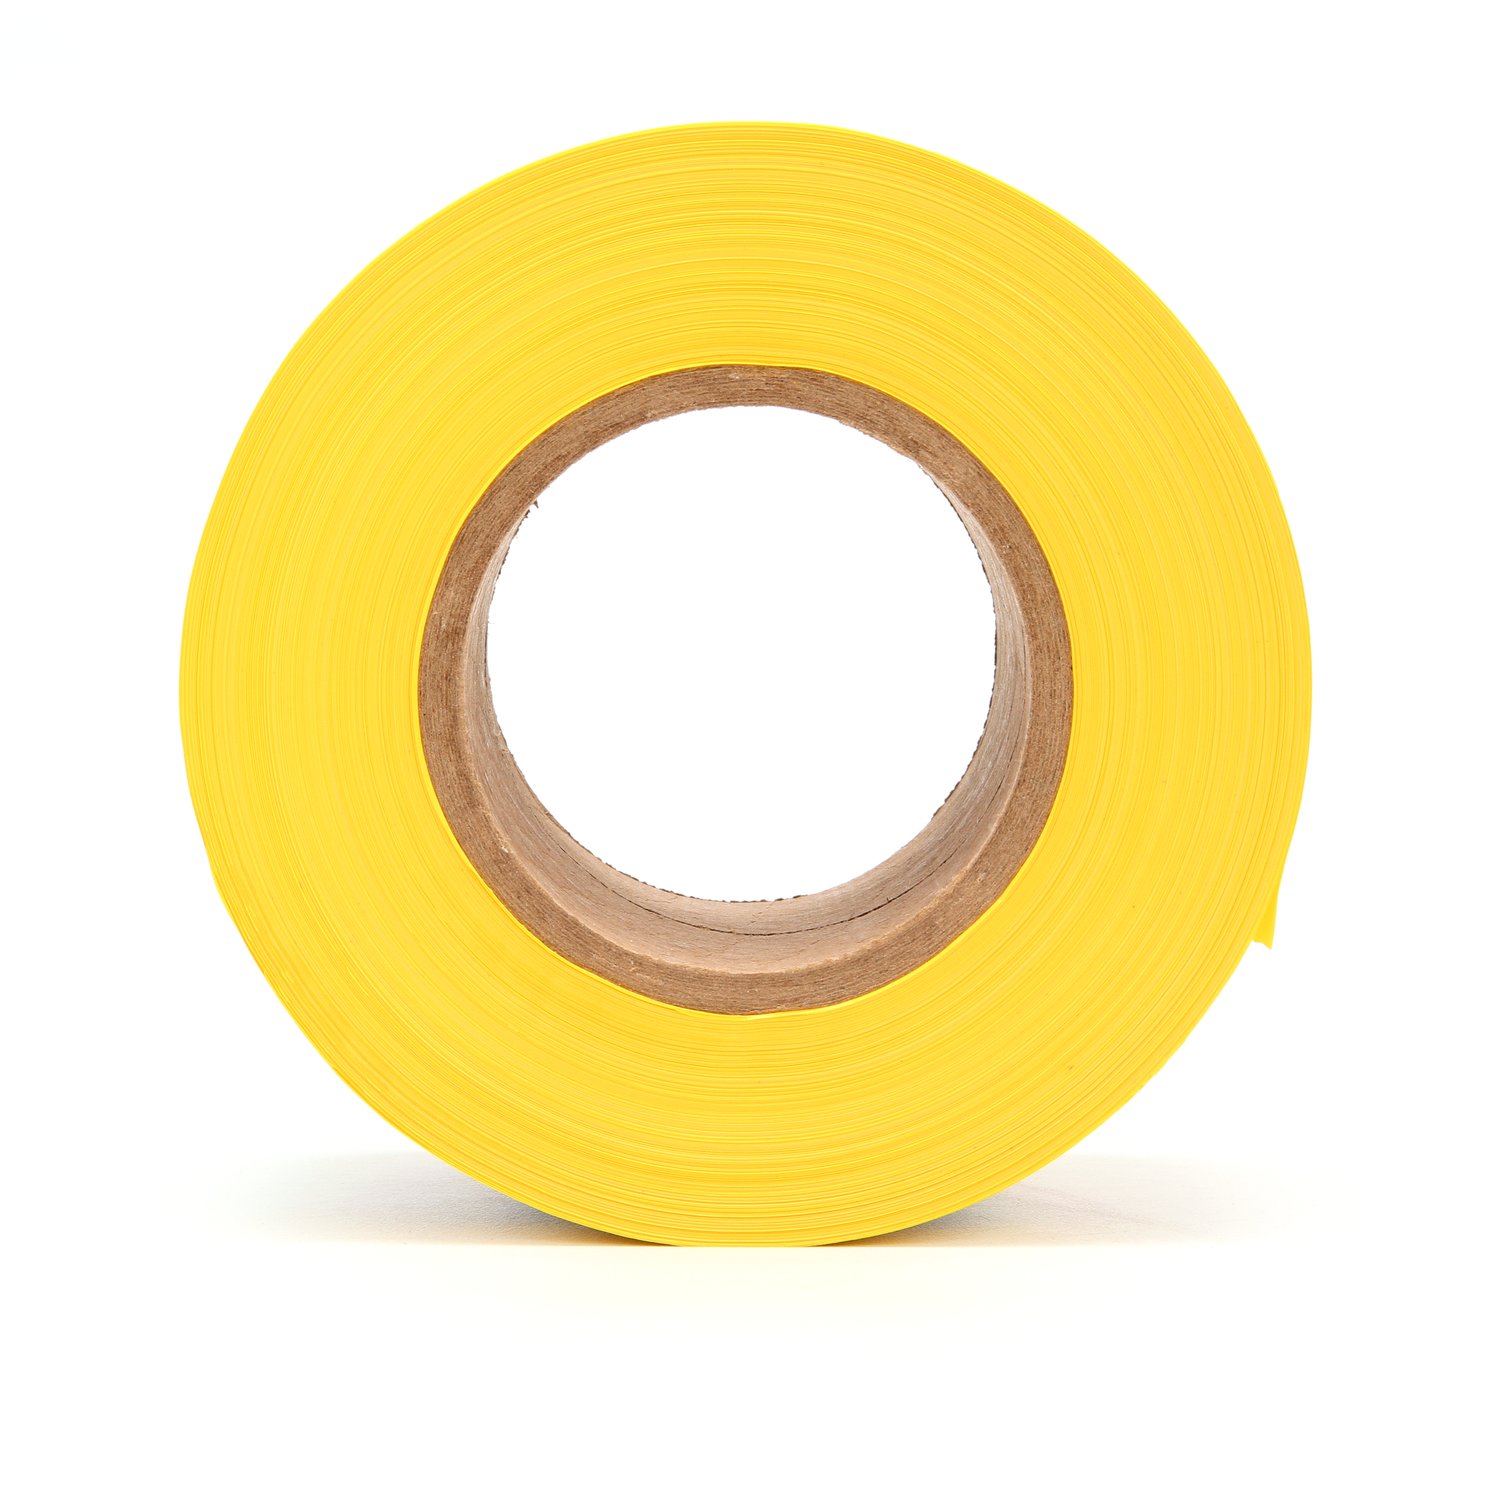 7100035358 - Scotch Barricade Tape 358, CAUTION HIGH VOLTAGE, 3 in x 1000 ft,
Yellow, 8 rolls/Case